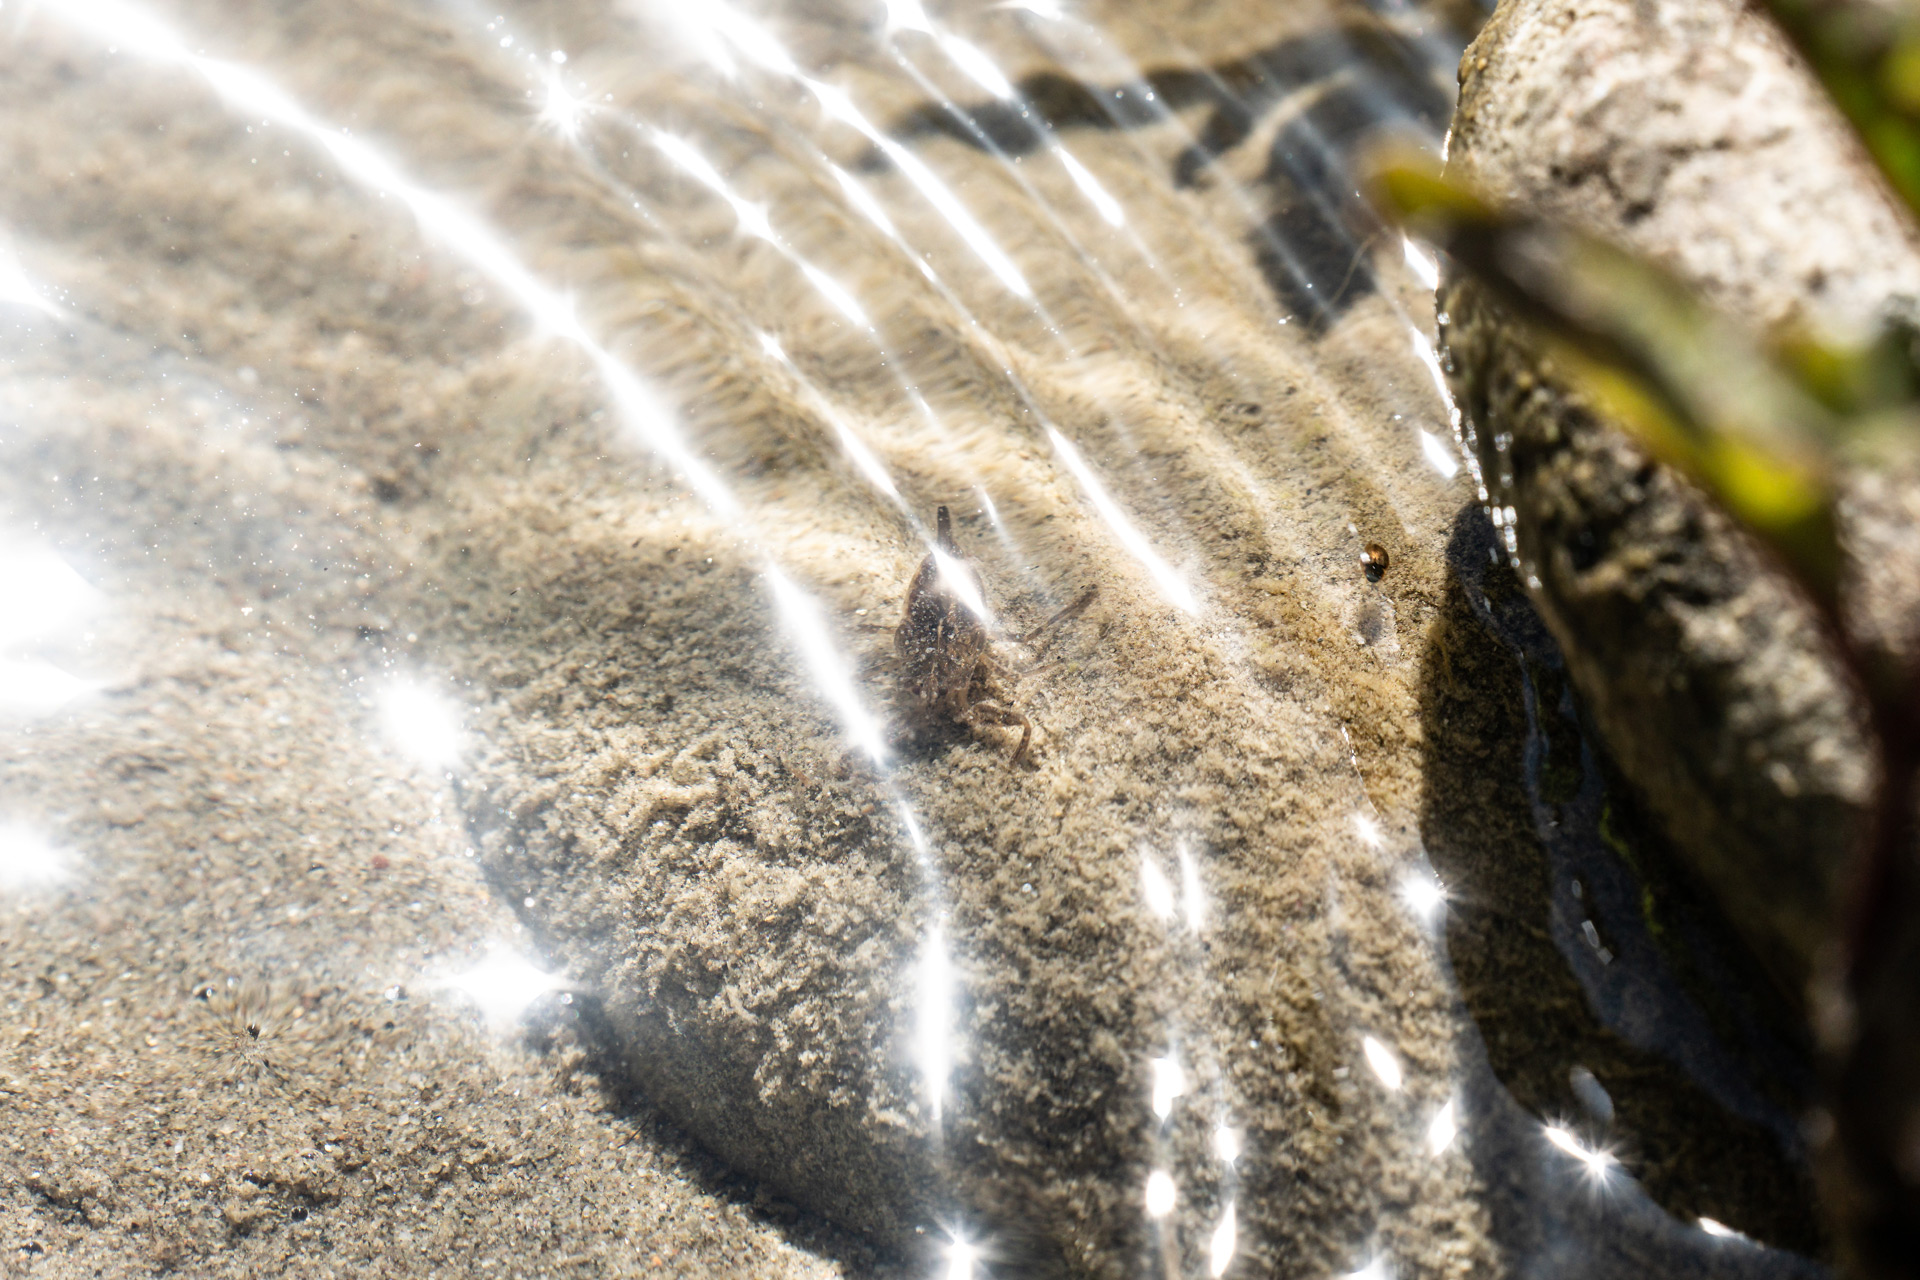 Aquatic animal on a sandy bottom in shallow clear water with light reflections on the water surface